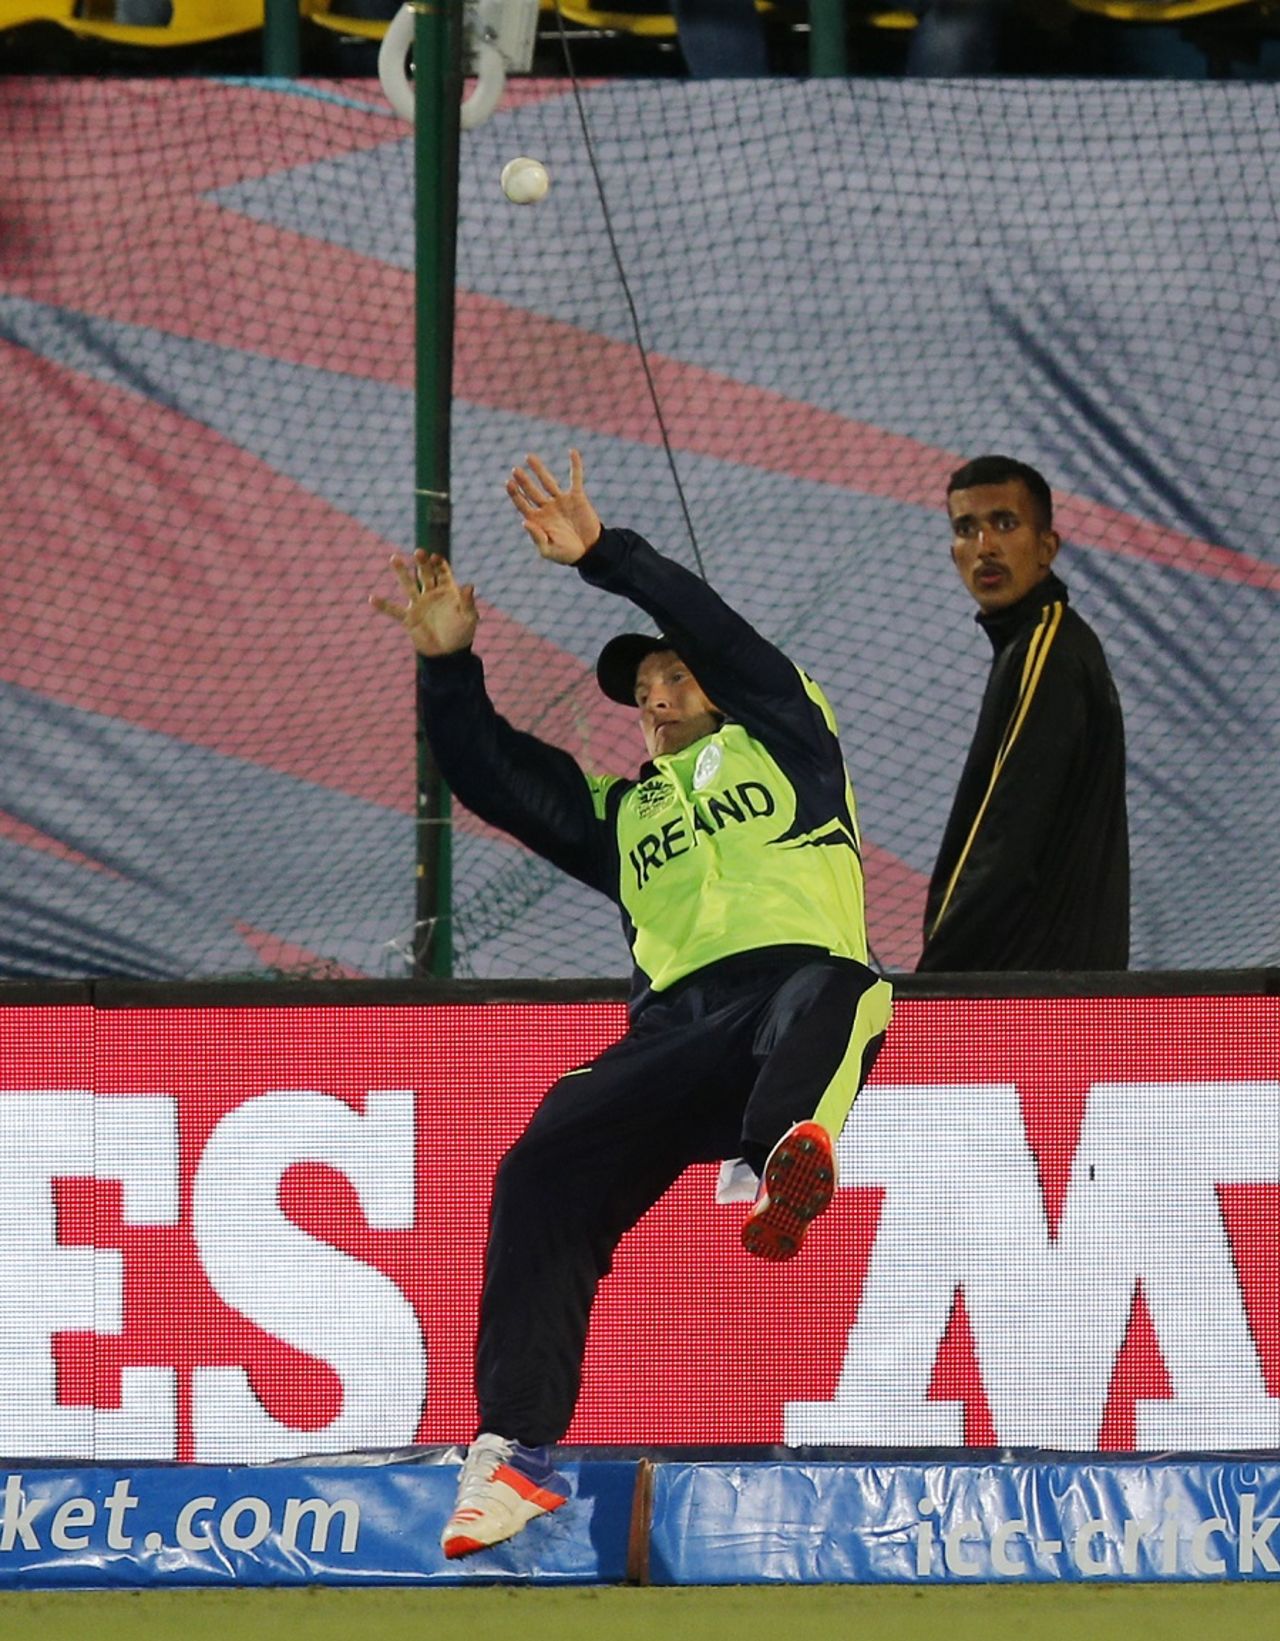 Gary Wilson attempts a catch near the boundary, Bangladesh v Ireland, World T20 qualifier, Group A, Dharamsala, March 11, 2016